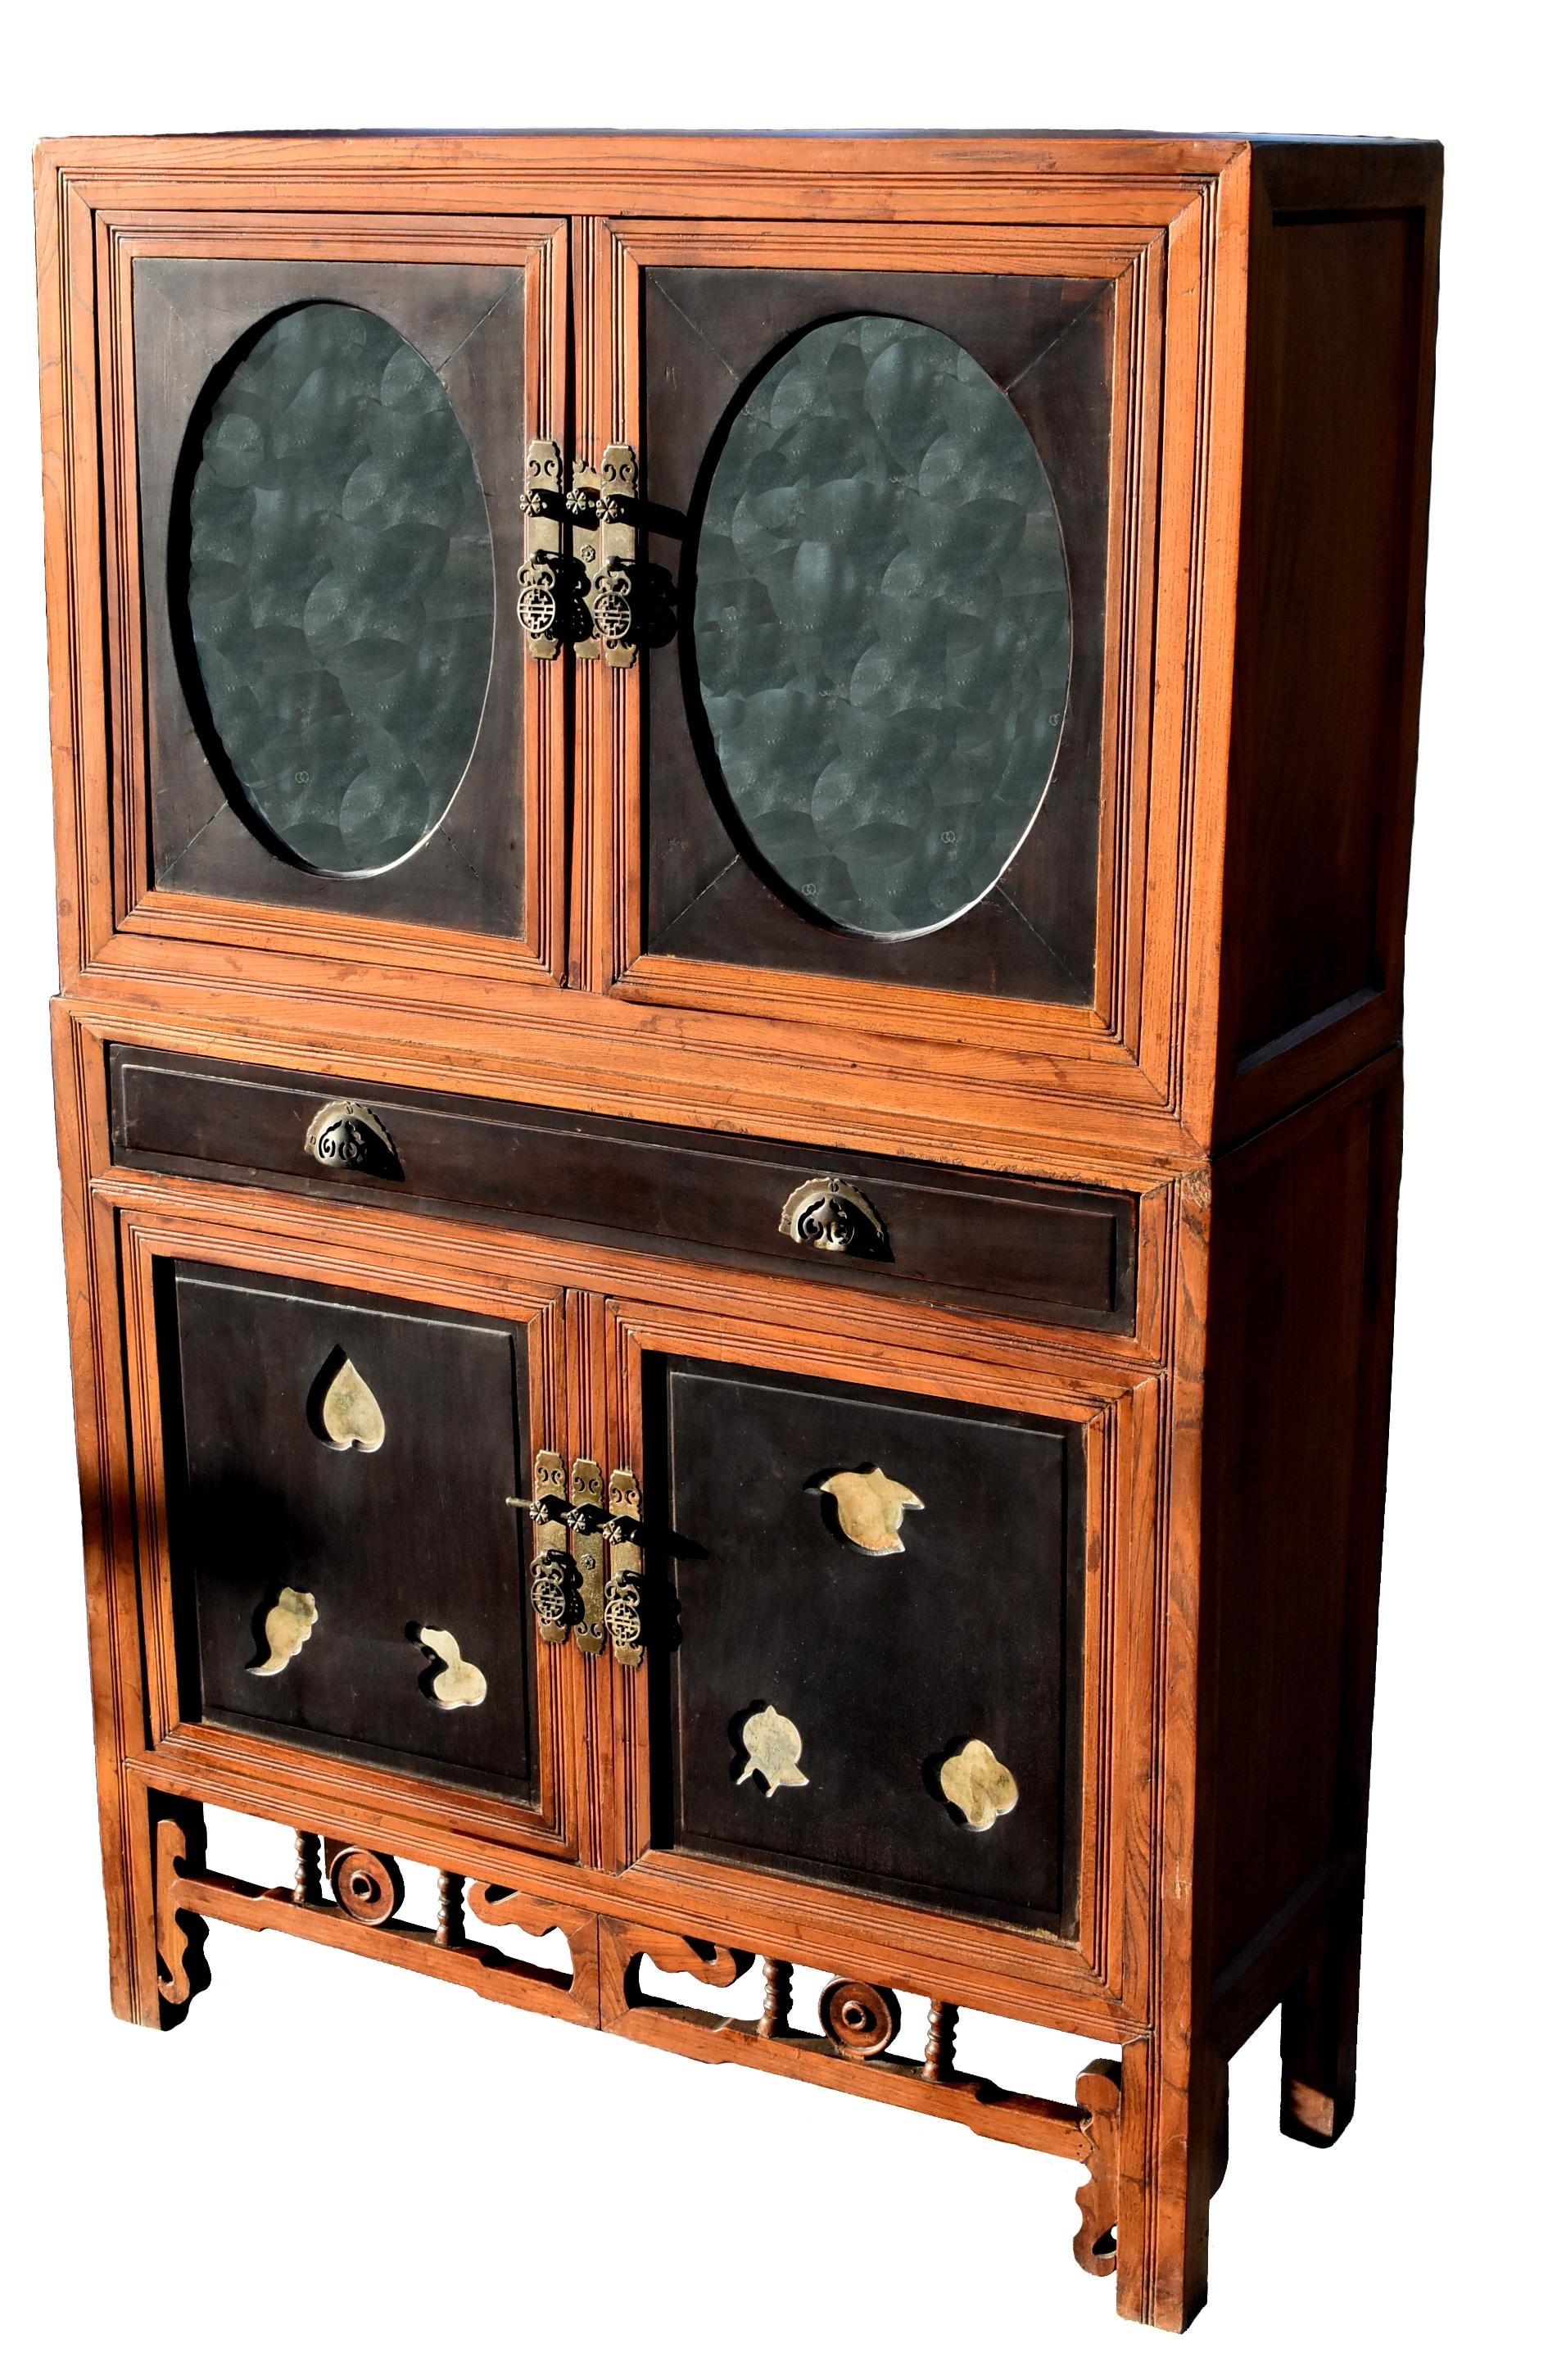 A highly sophisticated scholar's cabinet from turn of the century. Solid wood throughout, mitered, tenon and mortise construction. Contrast of dark rosewood and natural color elm wood with beautiful grains. Elegant mirrored top chest. Doors of